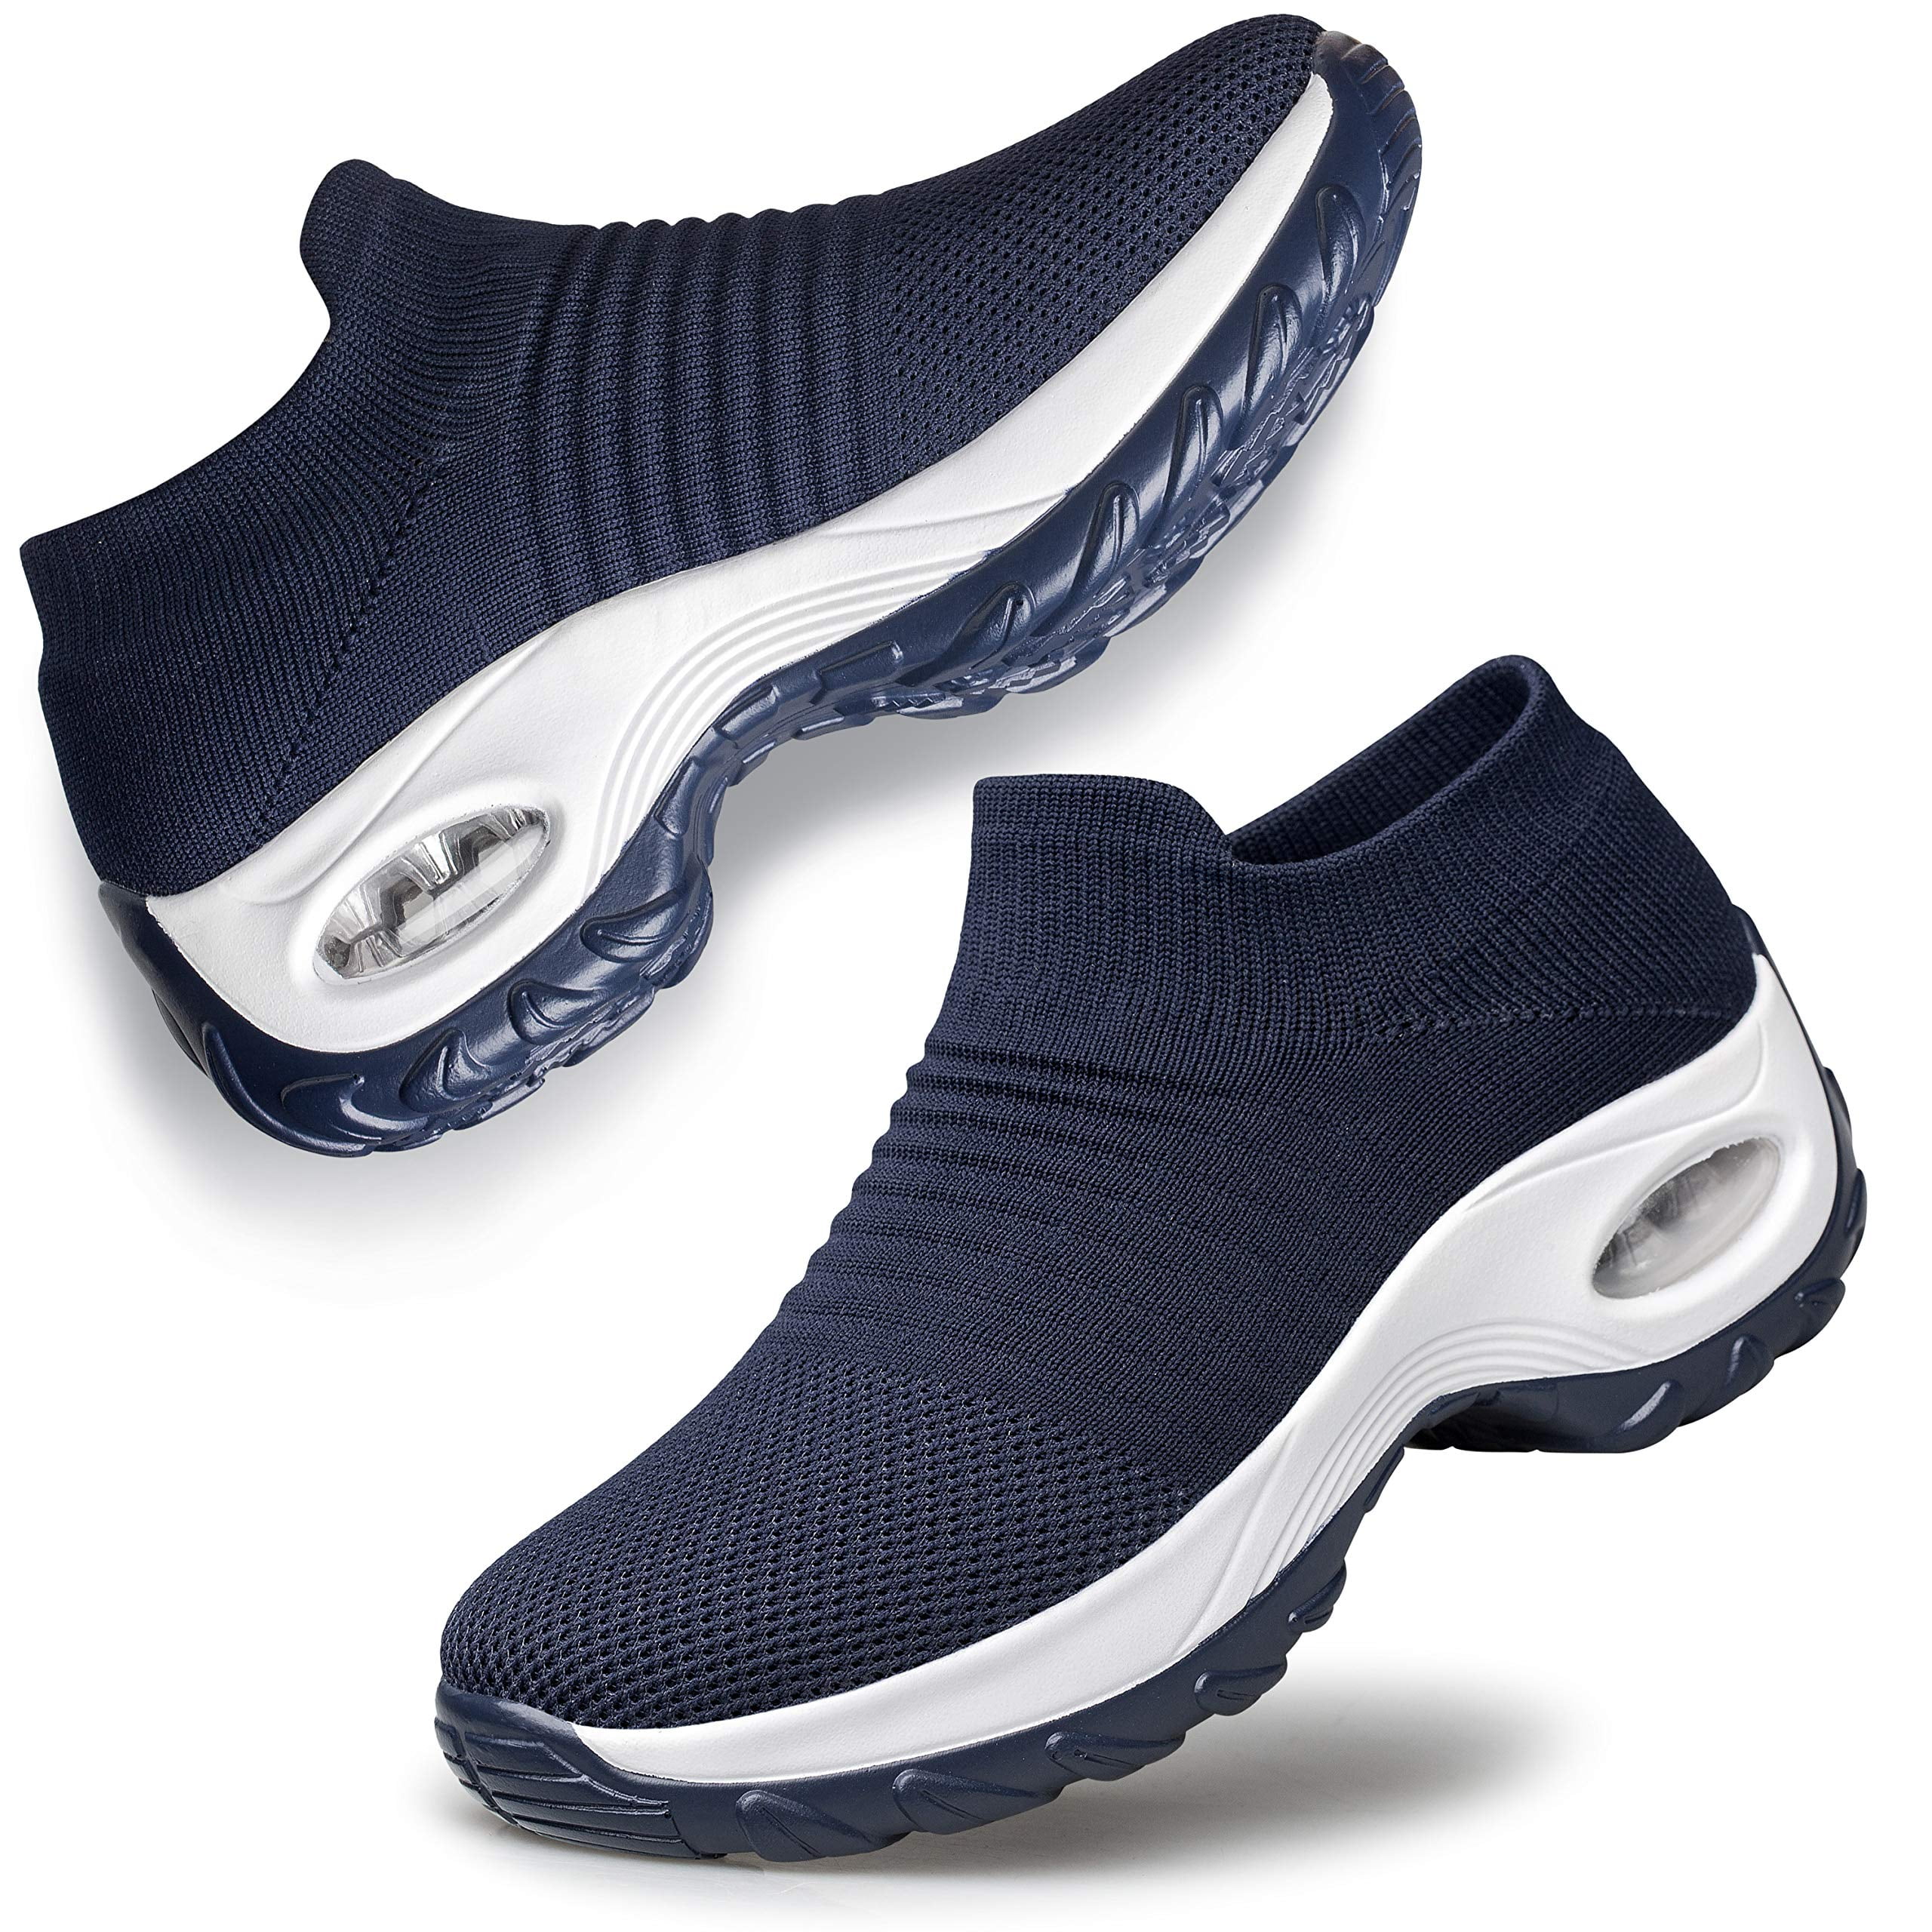 Walking Shoes for Women Sock Sneakers Air Cushion Athletic Shoes ...